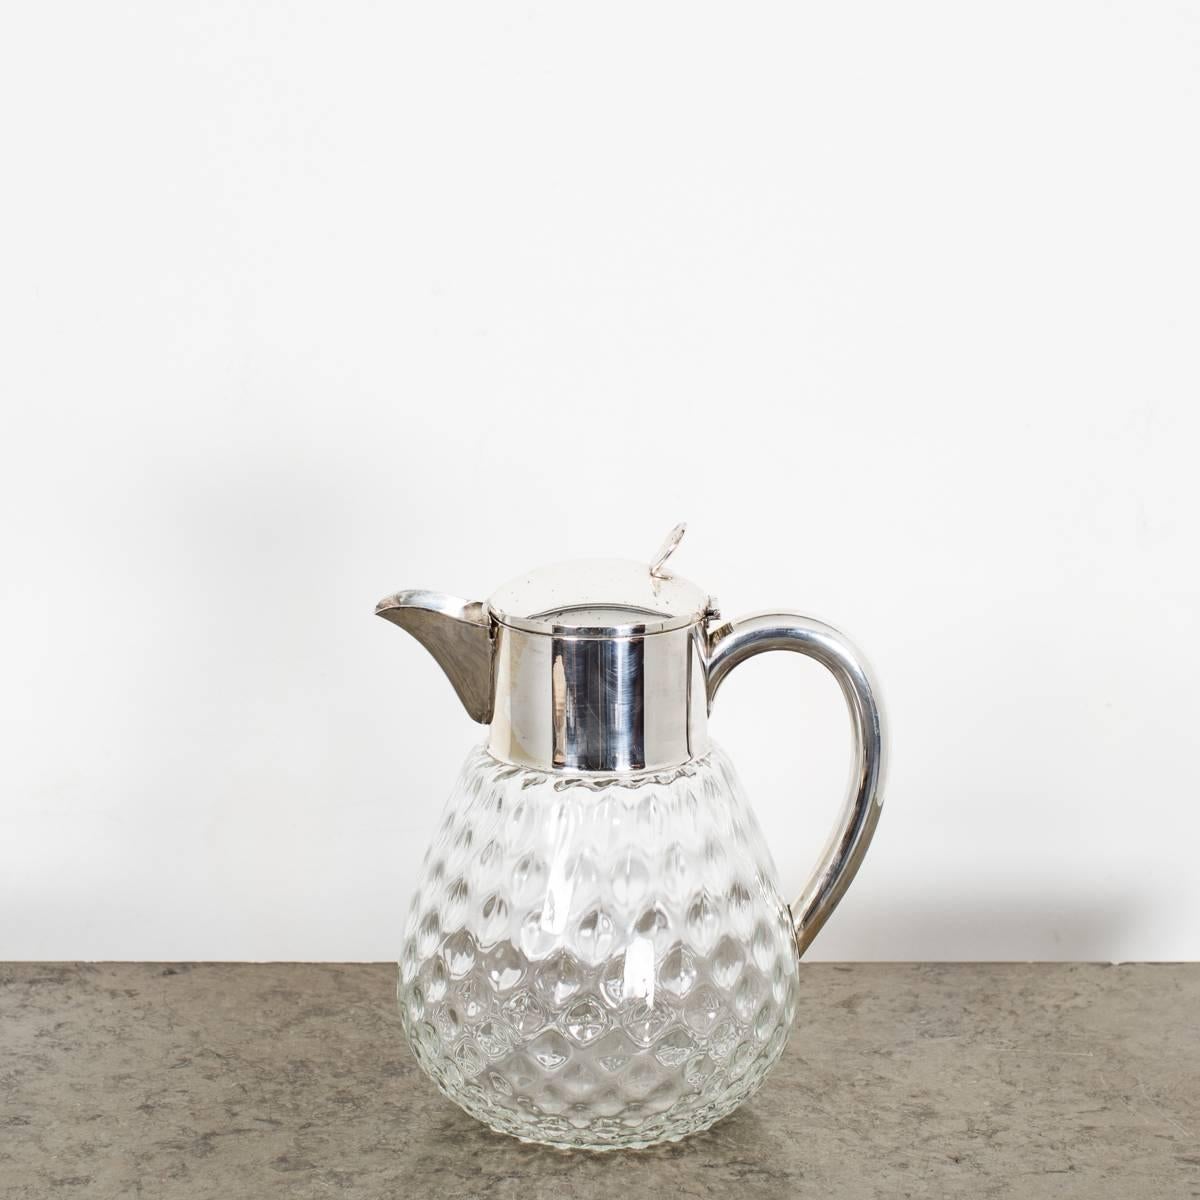 A large pitcher in glass made during the 19th century in Sweden. A patterned glass with a plate top. Removable ice stopper. 

 